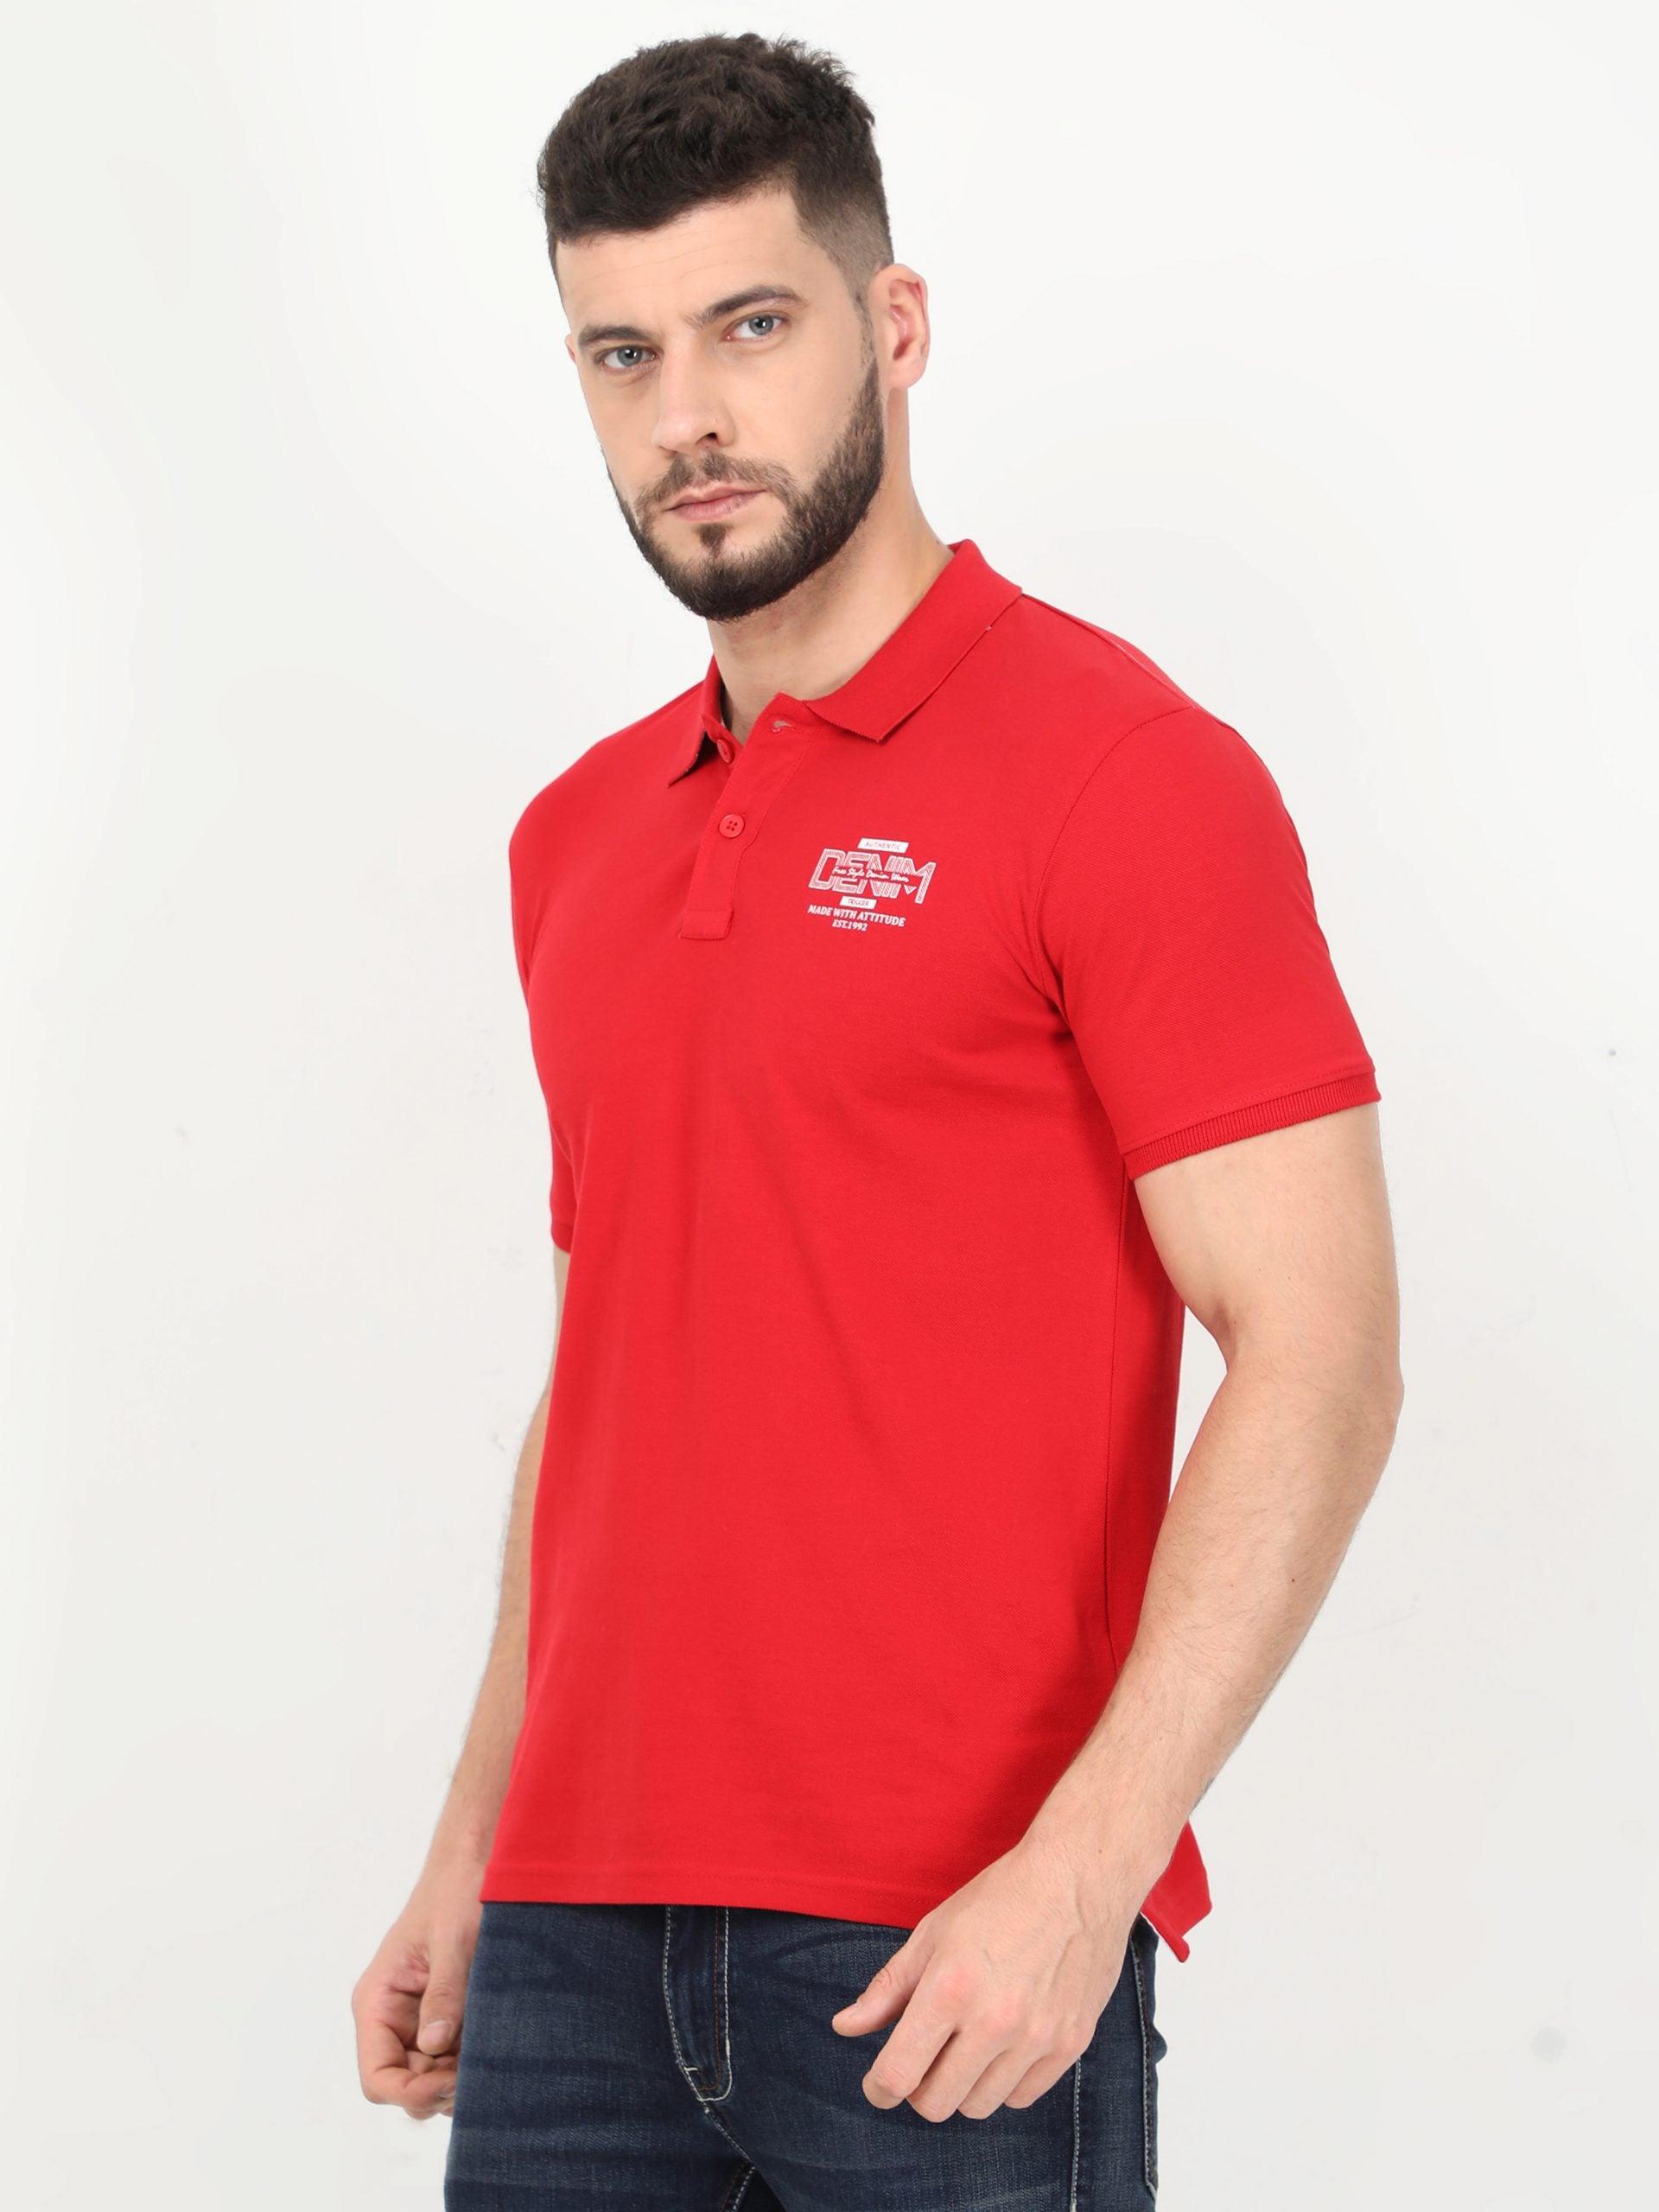 mens red t shirts